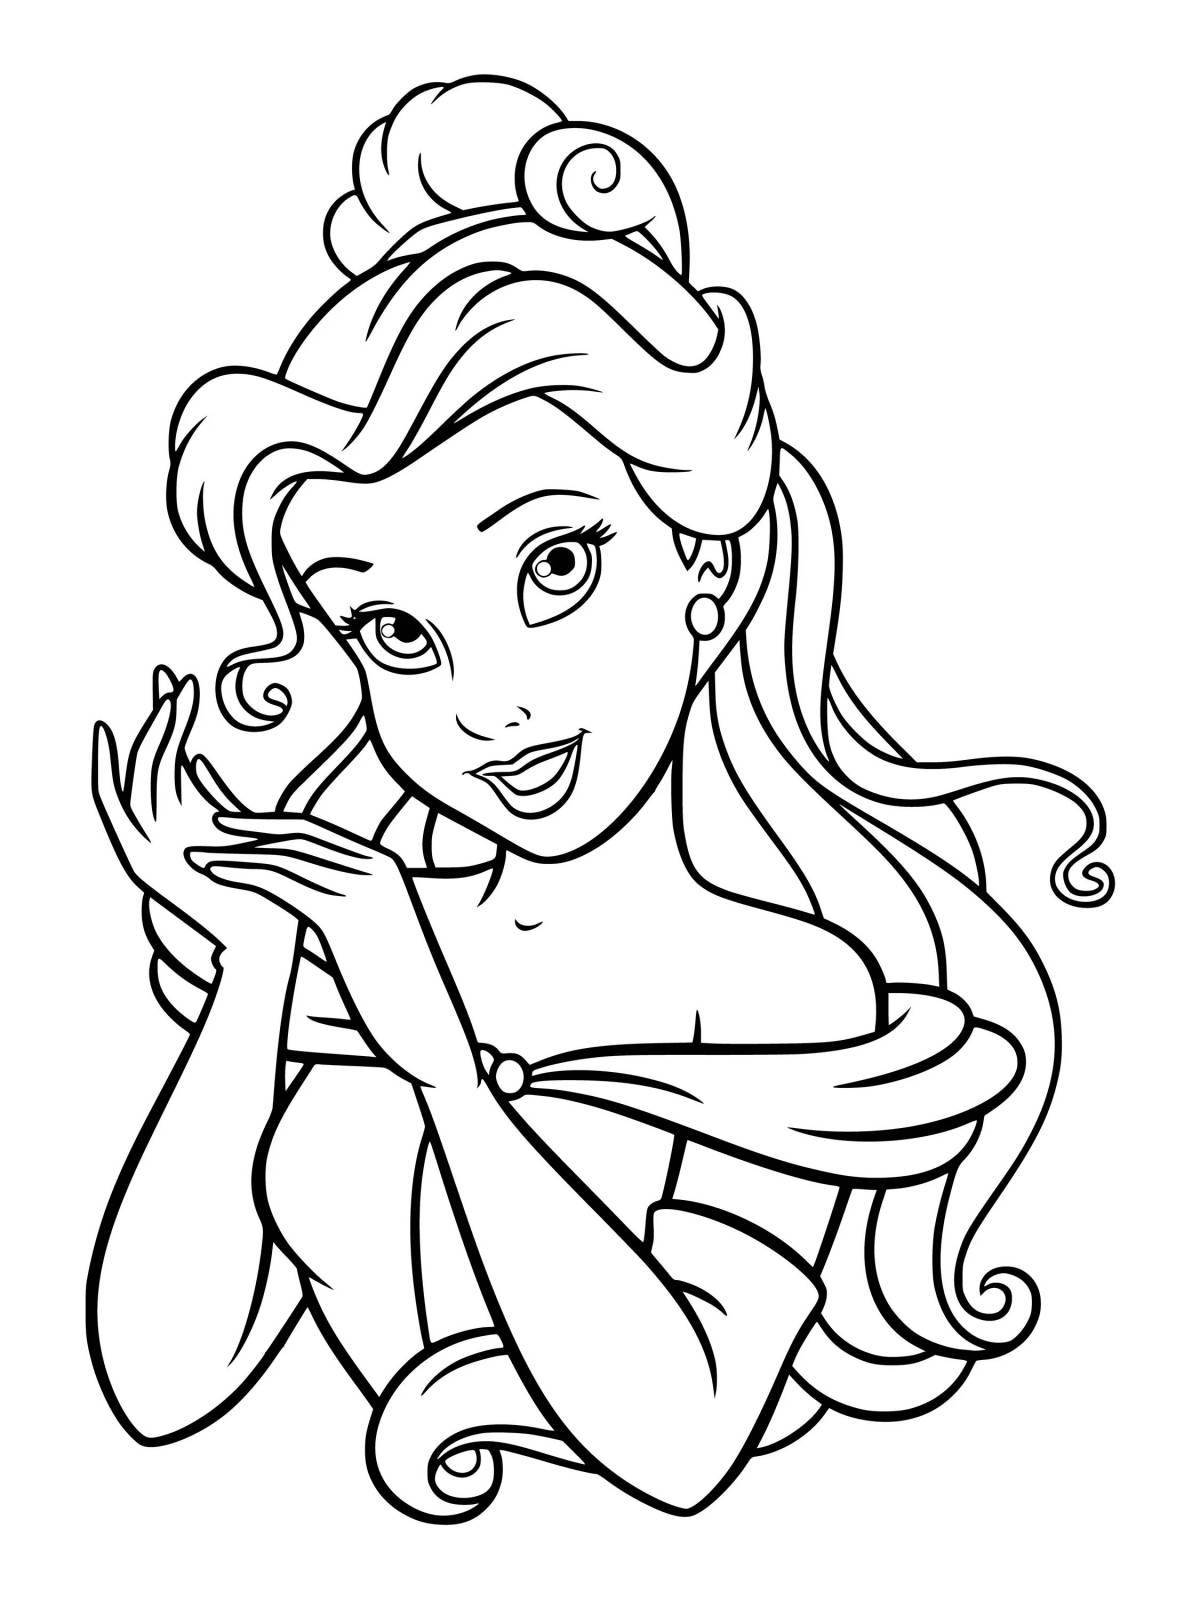 Majestic princess belle coloring page